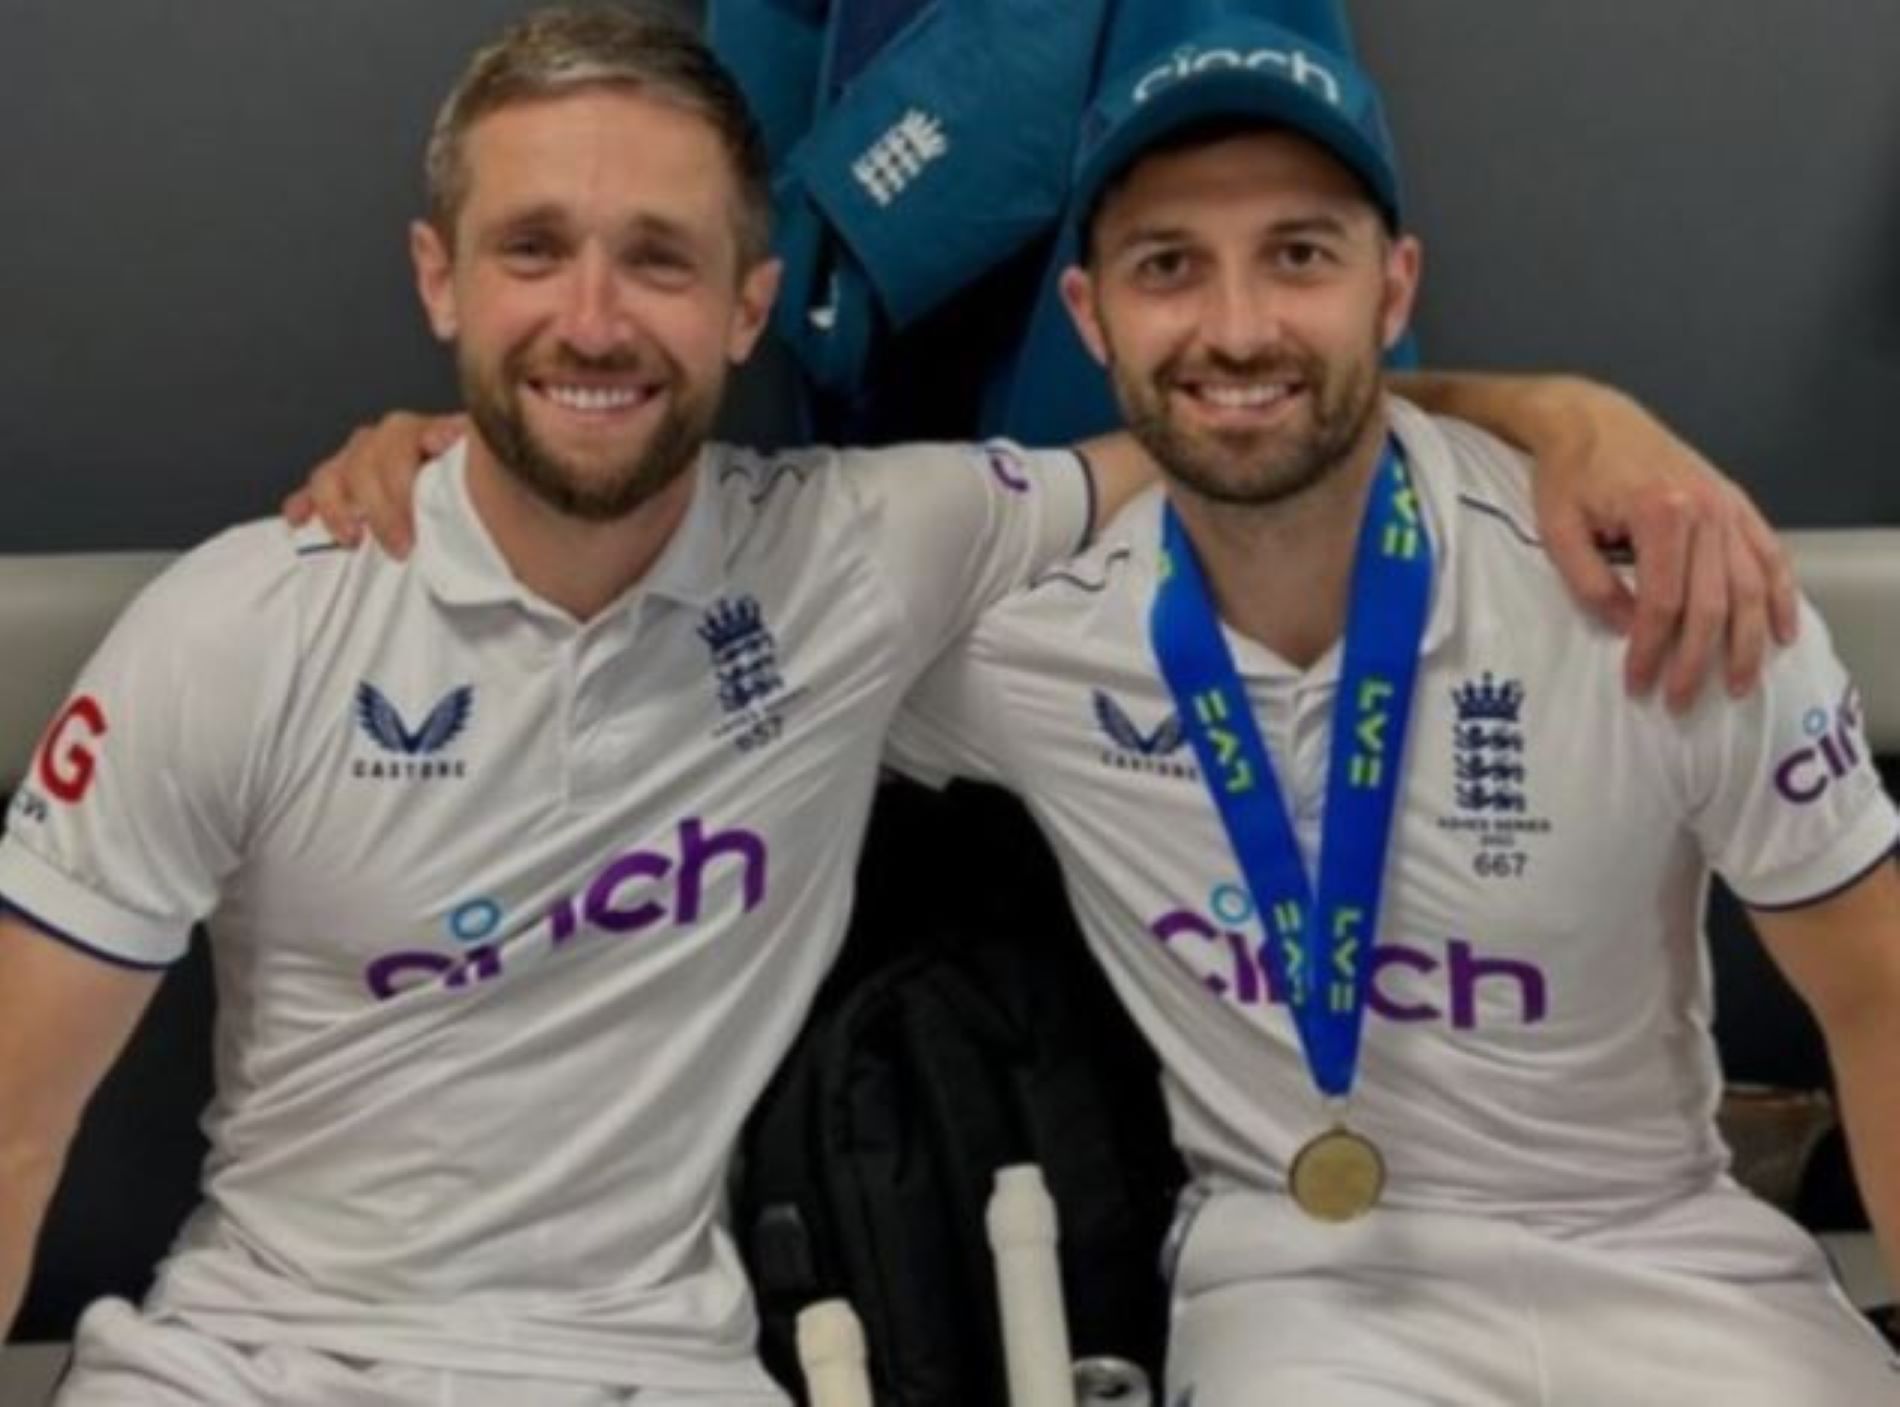 Woakes and Wood will look to replicate their Ashes heroics in the World Cup.